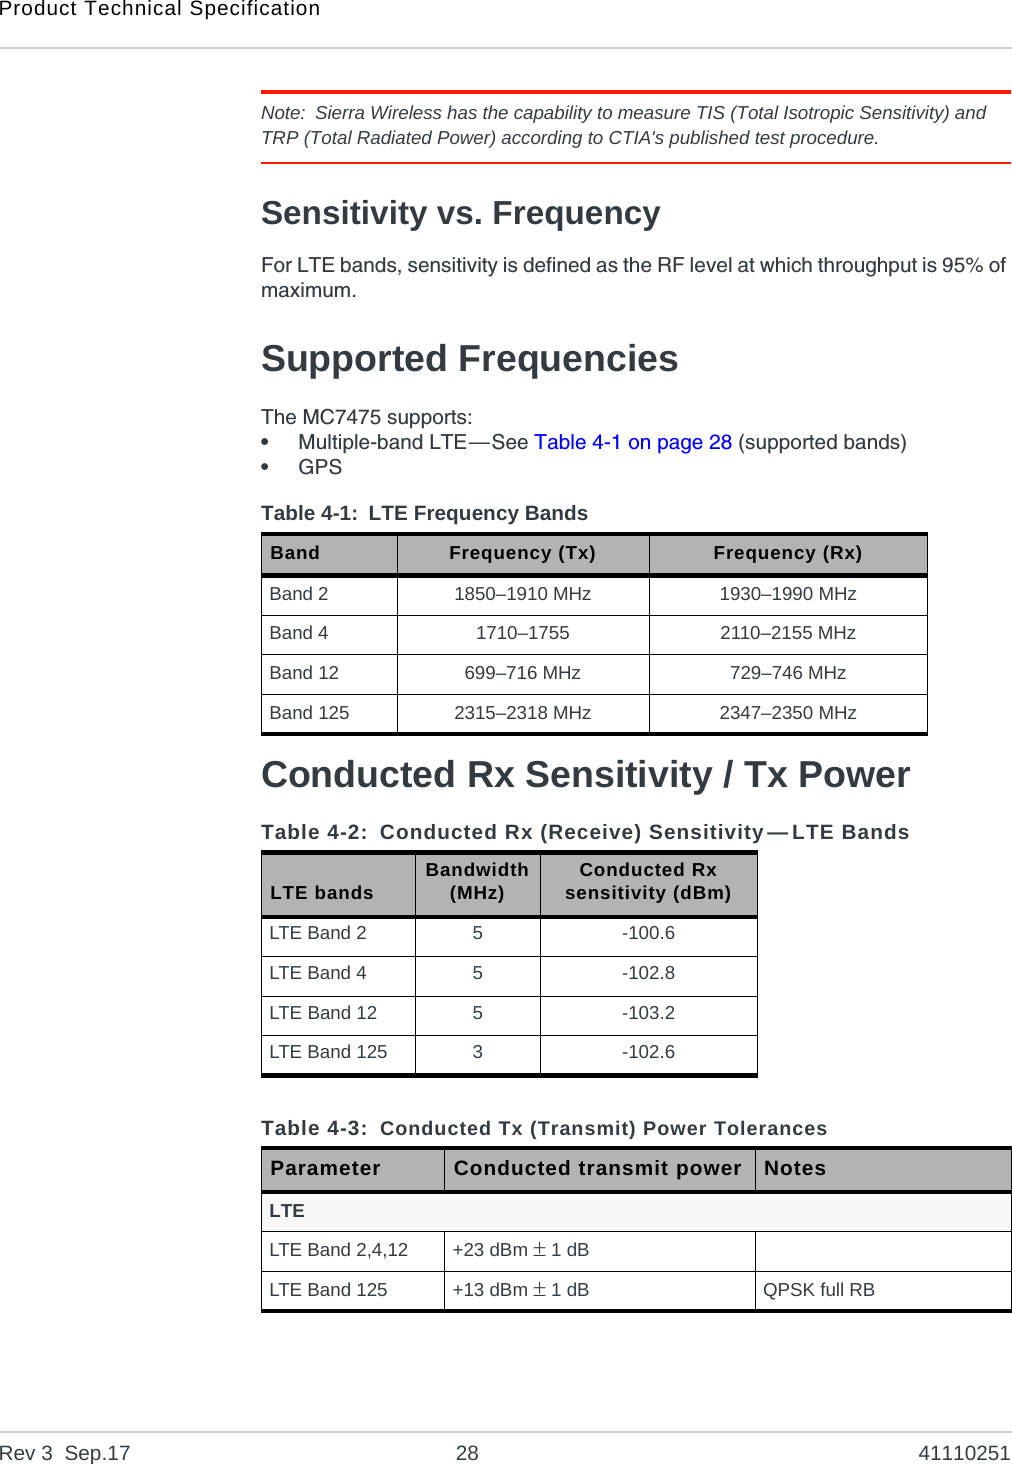 Product Technical SpecificationRev 3  Sep.17 28 41110251Note: Sierra Wireless has the capability to measure TIS (Total Isotropic Sensitivity) and TRP (Total Radiated Power) according to CTIA&apos;s published test procedure.Sensitivity vs. FrequencyFor LTE bands, sensitivity is defined as the RF level at which throughput is 95% of maximum.Supported FrequenciesThe MC7475 supports:•Multiple-band LTE—See Table 4-1 on page 28 (supported bands)•GPSConducted Rx Sensitivity / Tx PowerTable 4-1: LTE Frequency BandsBand Frequency (Tx) Frequency (Rx)Band 2 1850–1910 MHz 1930–1990 MHzBand 4 1710–1755 2110–2155 MHzBand 12 699–716 MHz 729–746 MHzBand 125 2315–2318 MHz 2347–2350 MHzTable 4-2: Conducted Rx (Receive) Sensitivity—LTE BandsLTE bands Bandwidth(MHz) Conducted Rx sensitivity (dBm)LTE Band 2 5-100.6LTE Band 4 5-102.8LTE Band 12 5-103.2LTE Band 125 3-102.6Table 4-3: Conducted Tx (Transmit) Power TolerancesParameter Conducted transmit power NotesLTELTE Band 2,4,12 +23 dBm  1dBLTE Band 125 +13 dBm  1dB QPSK full RB